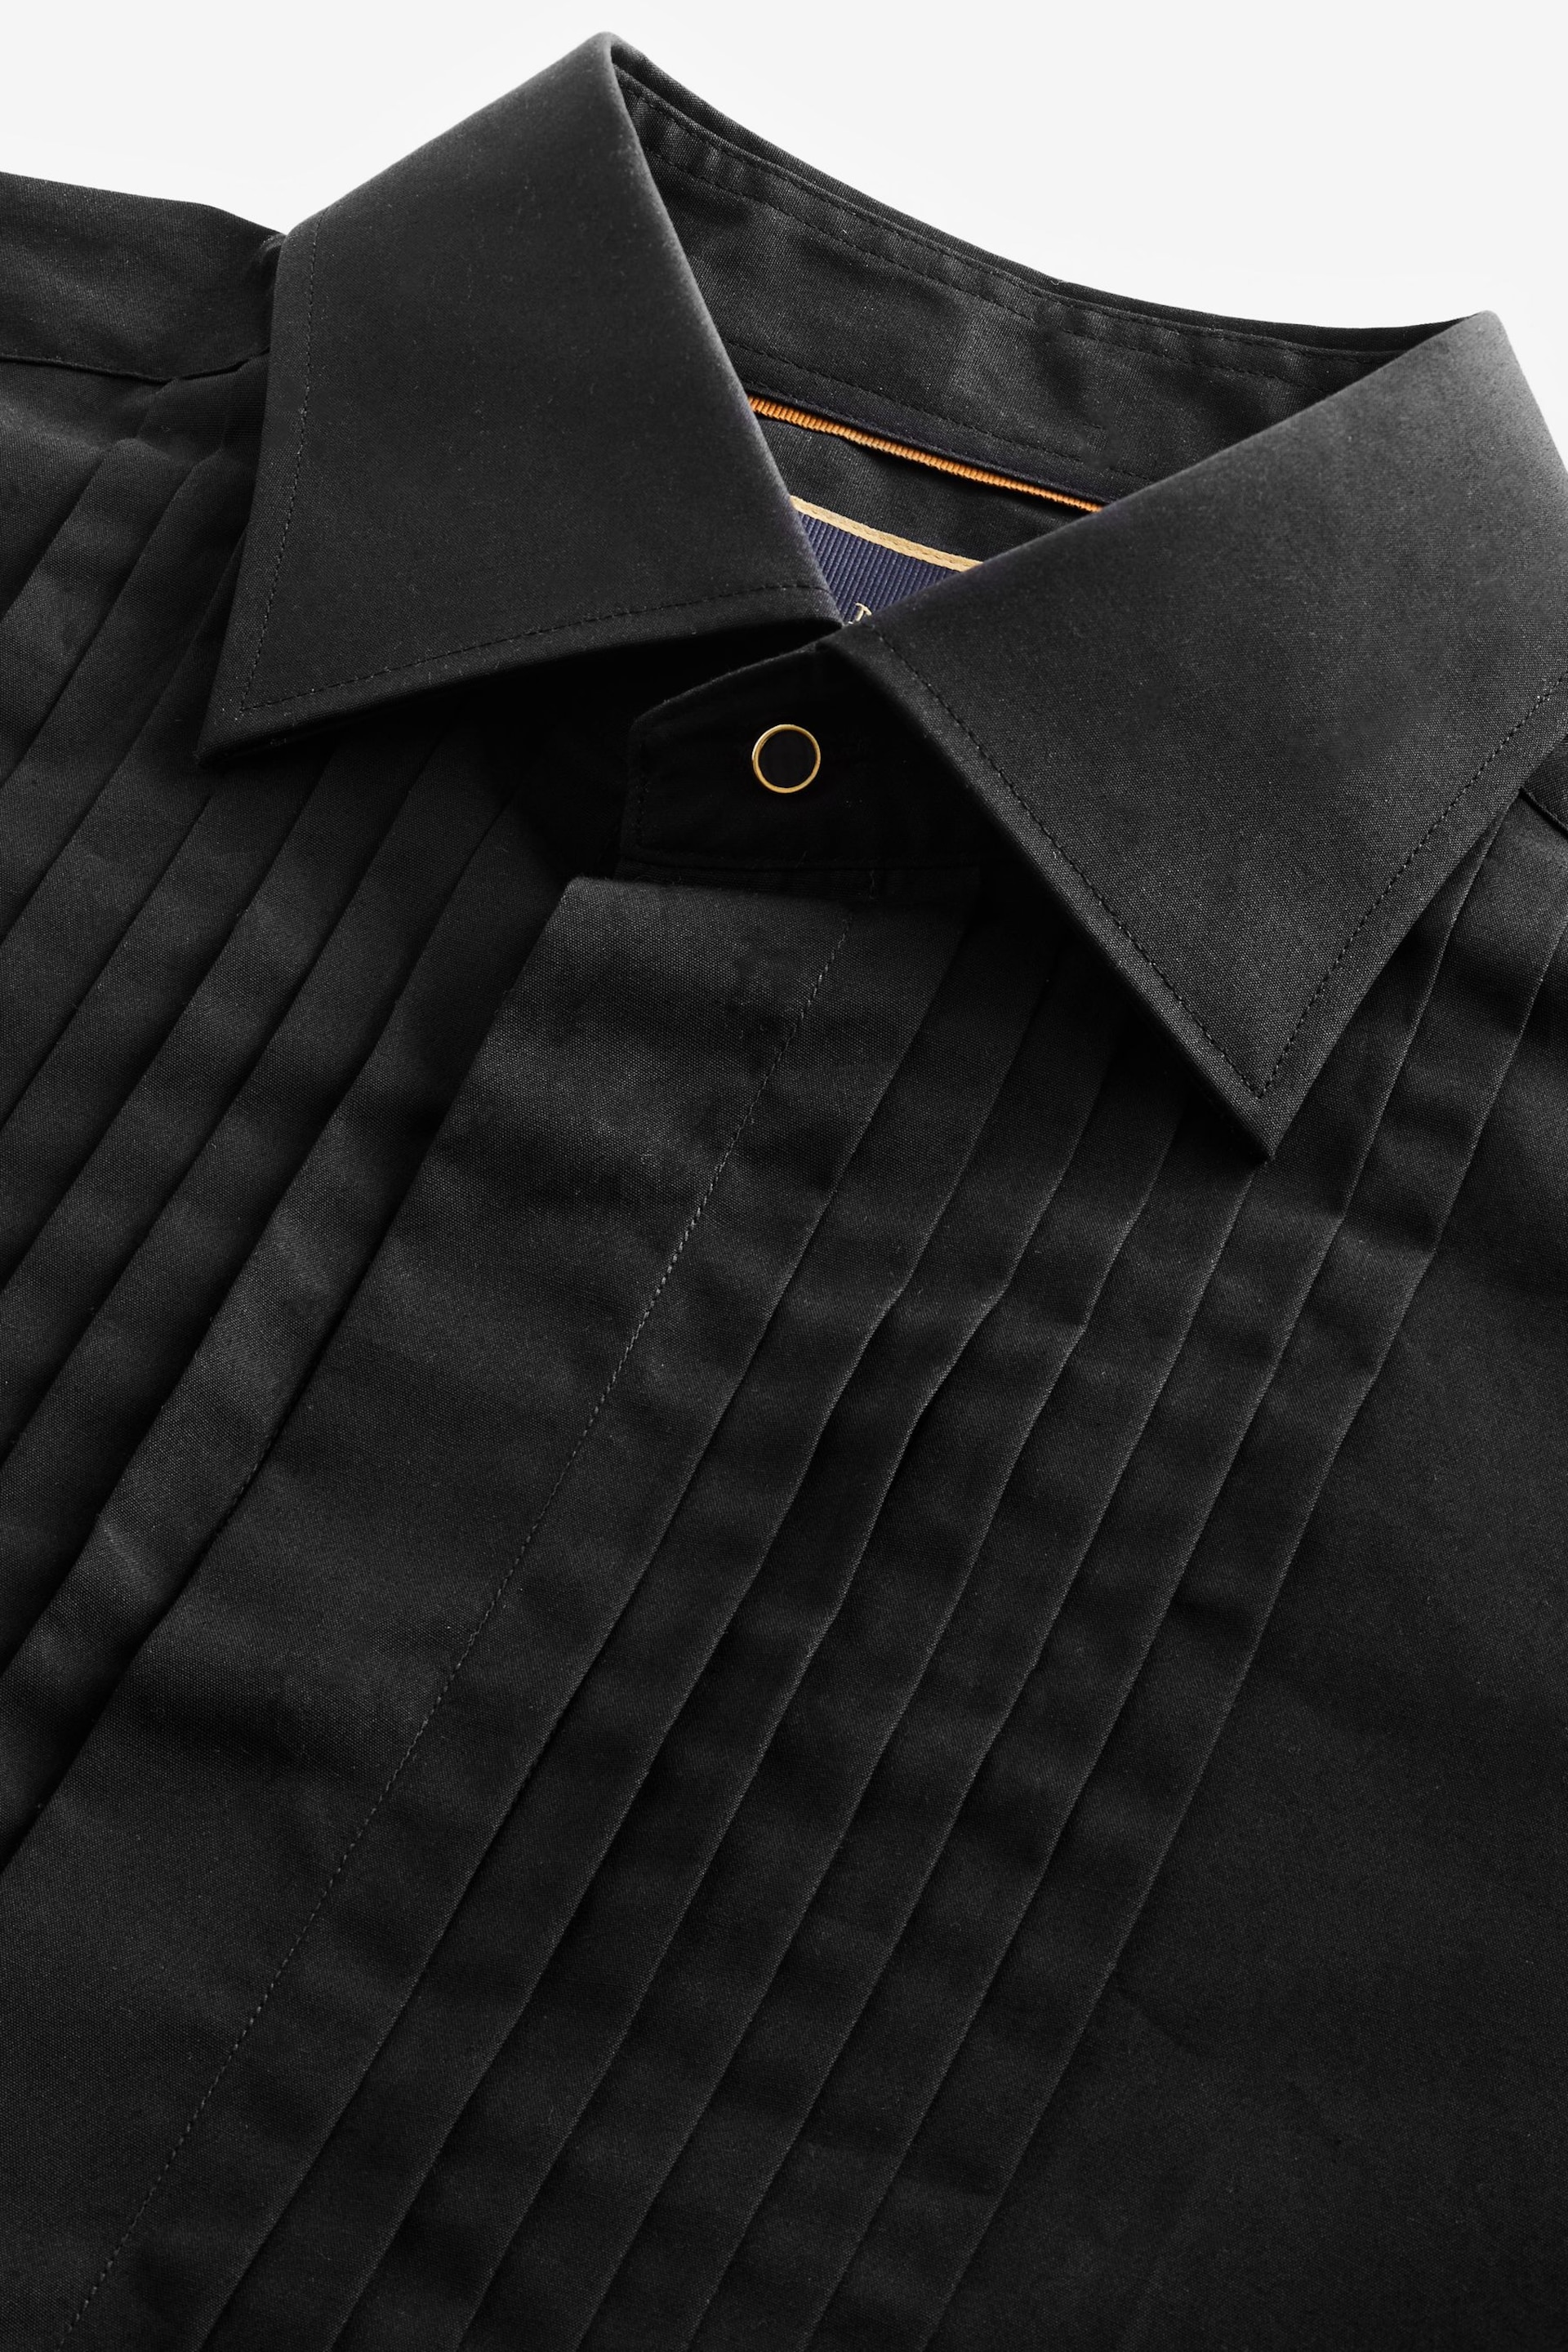 Black Regular Fit Pleated Double Cuff Dress Shirt - Image 6 of 7